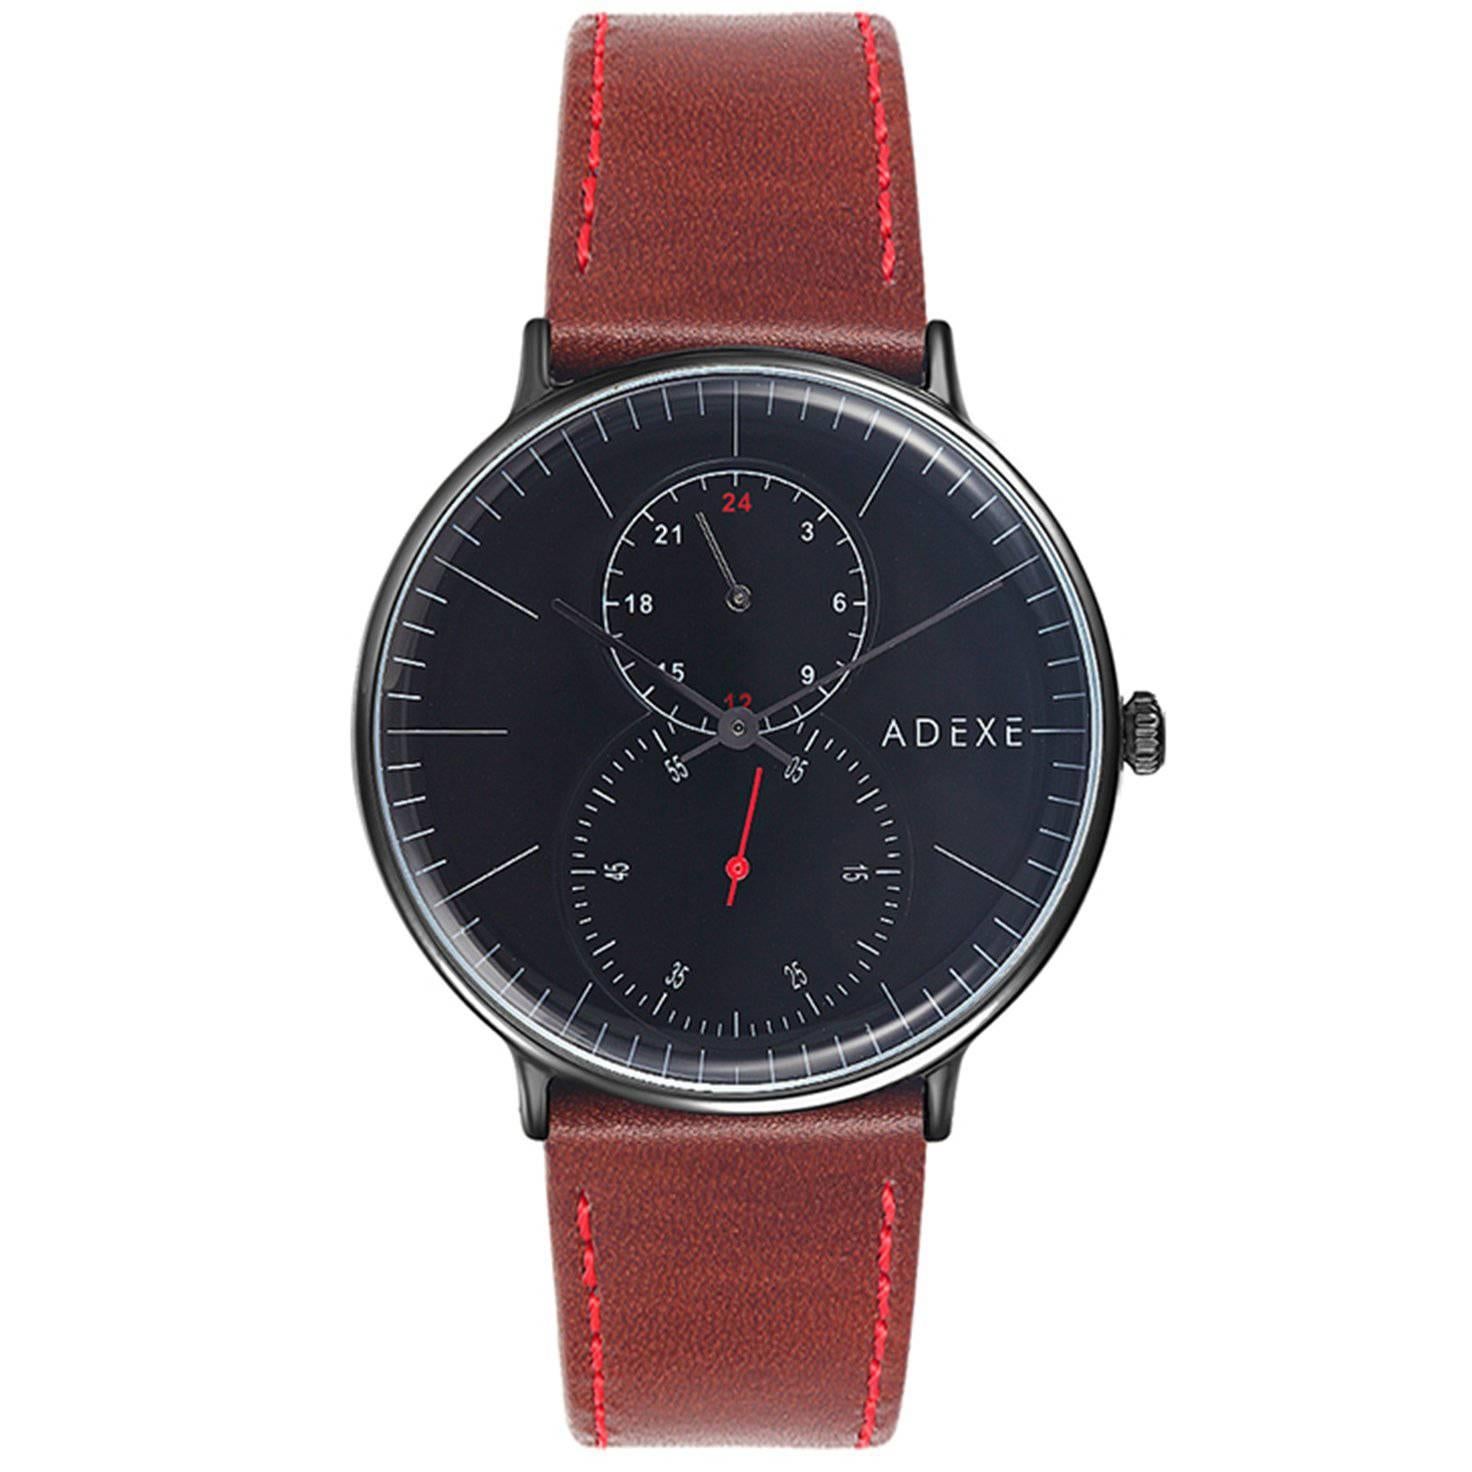 Foreseer Black and Brown Genuine Italian Leather Lifestyle Watch For Sale